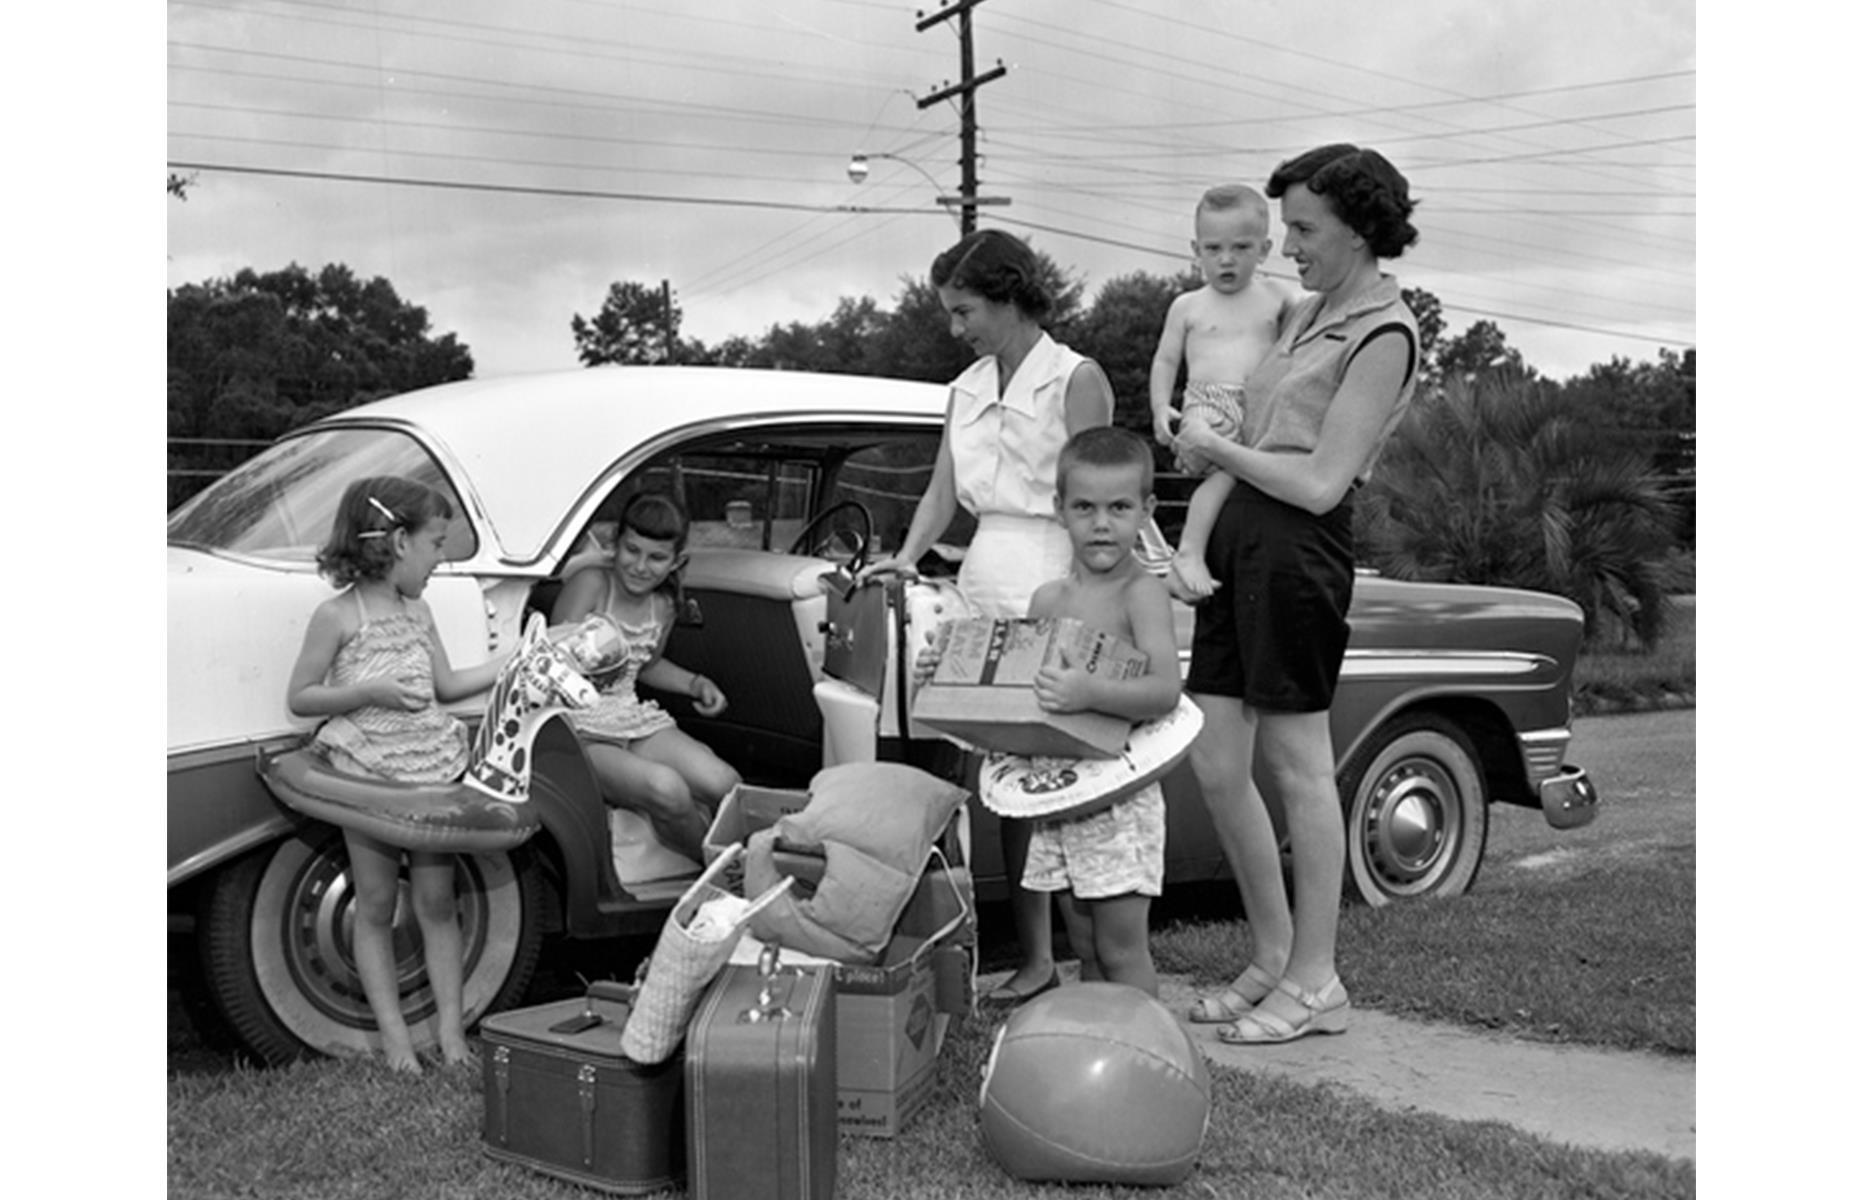 By the 1950s, car ownership had surged and many Americans chose to hit the road during their vacation time. This young family are striking out to the coast from Tallahassee, Florida, armed with beach balls, water donuts and plenty of luggage.